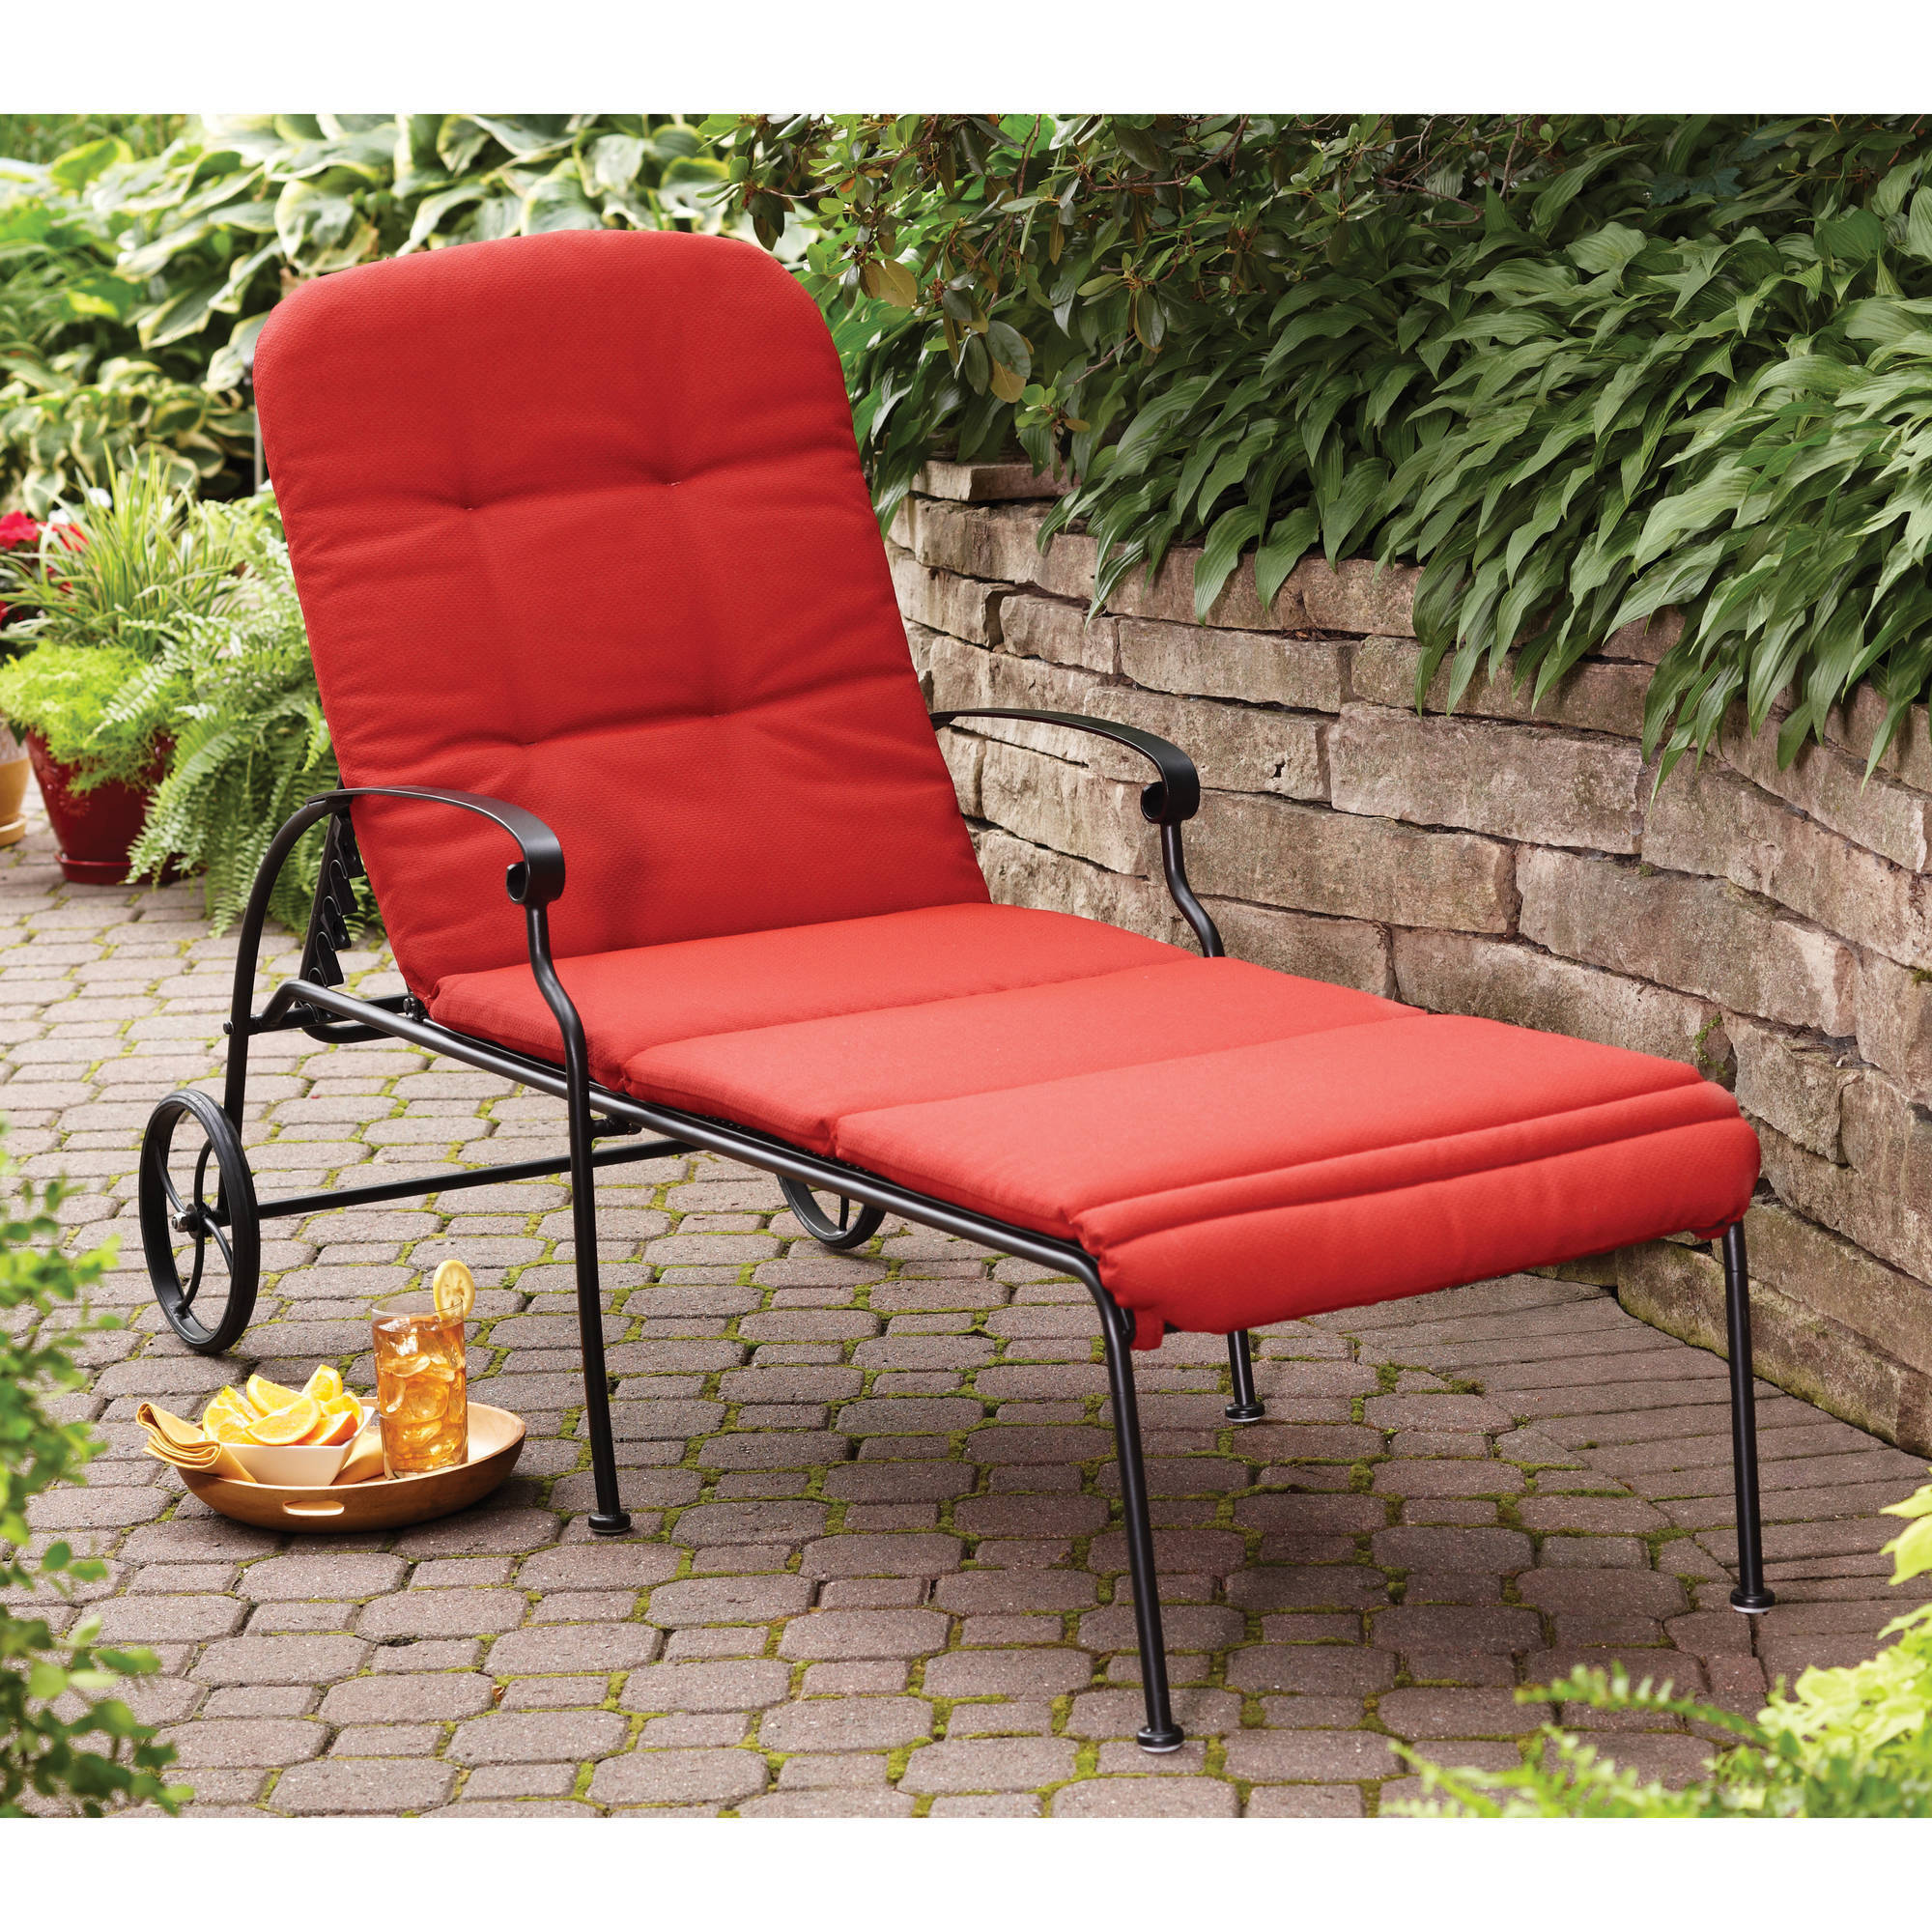 Cool Better Homes and Gardens Clayton Court Chaise Lounge with Wheels outdoor chaise lounge with wheels